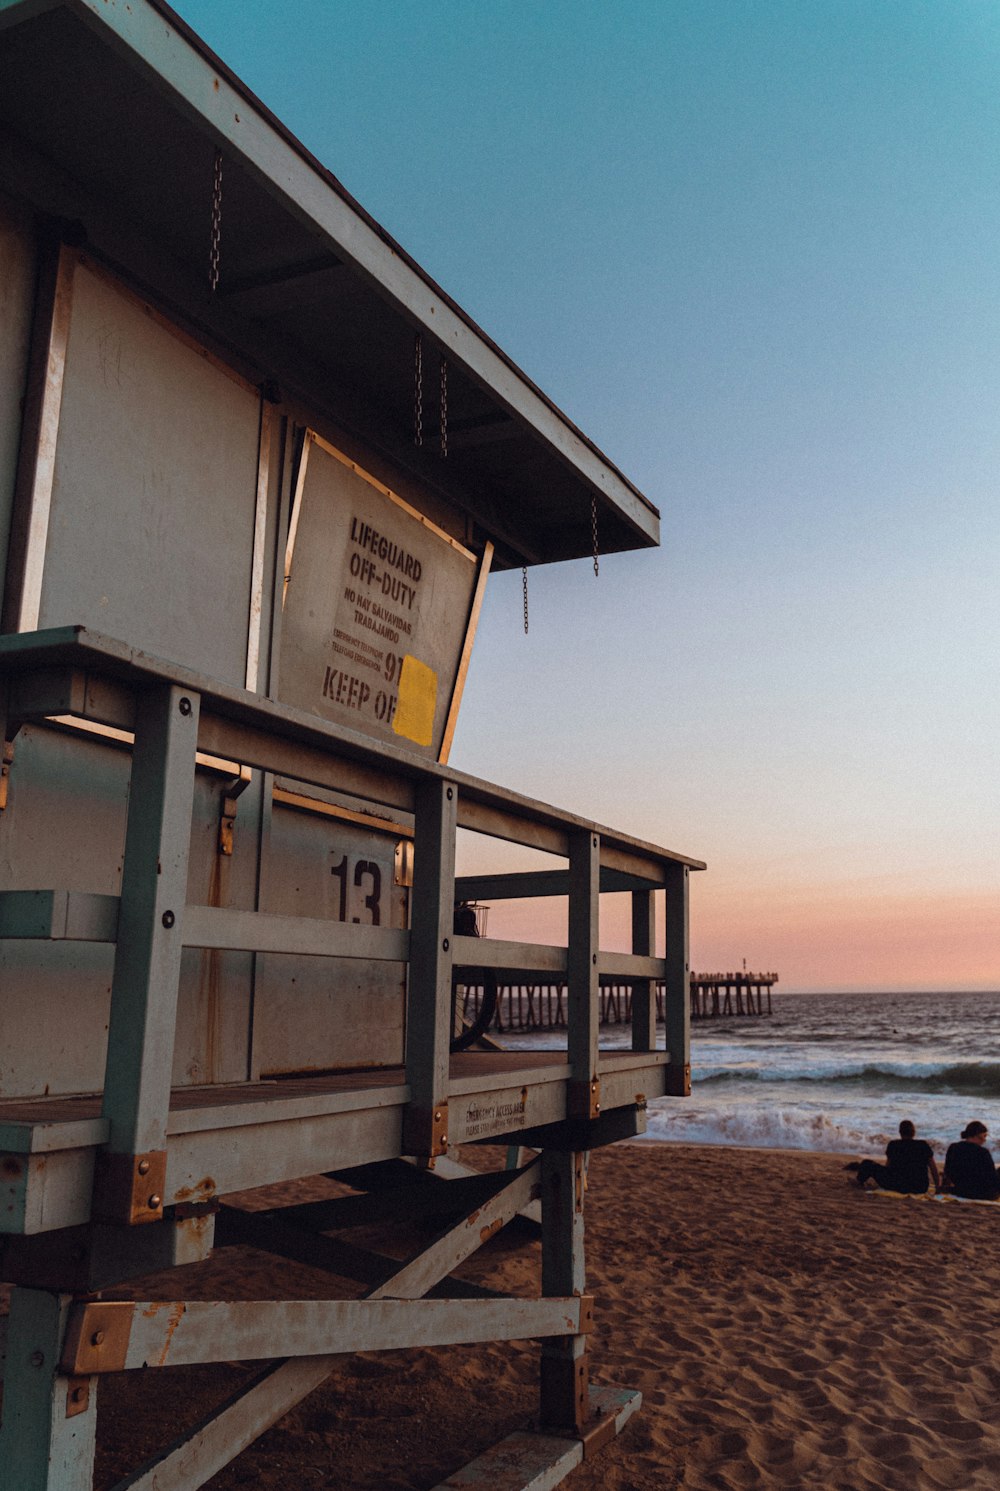 a lifeguard station sitting on the beach at sunset